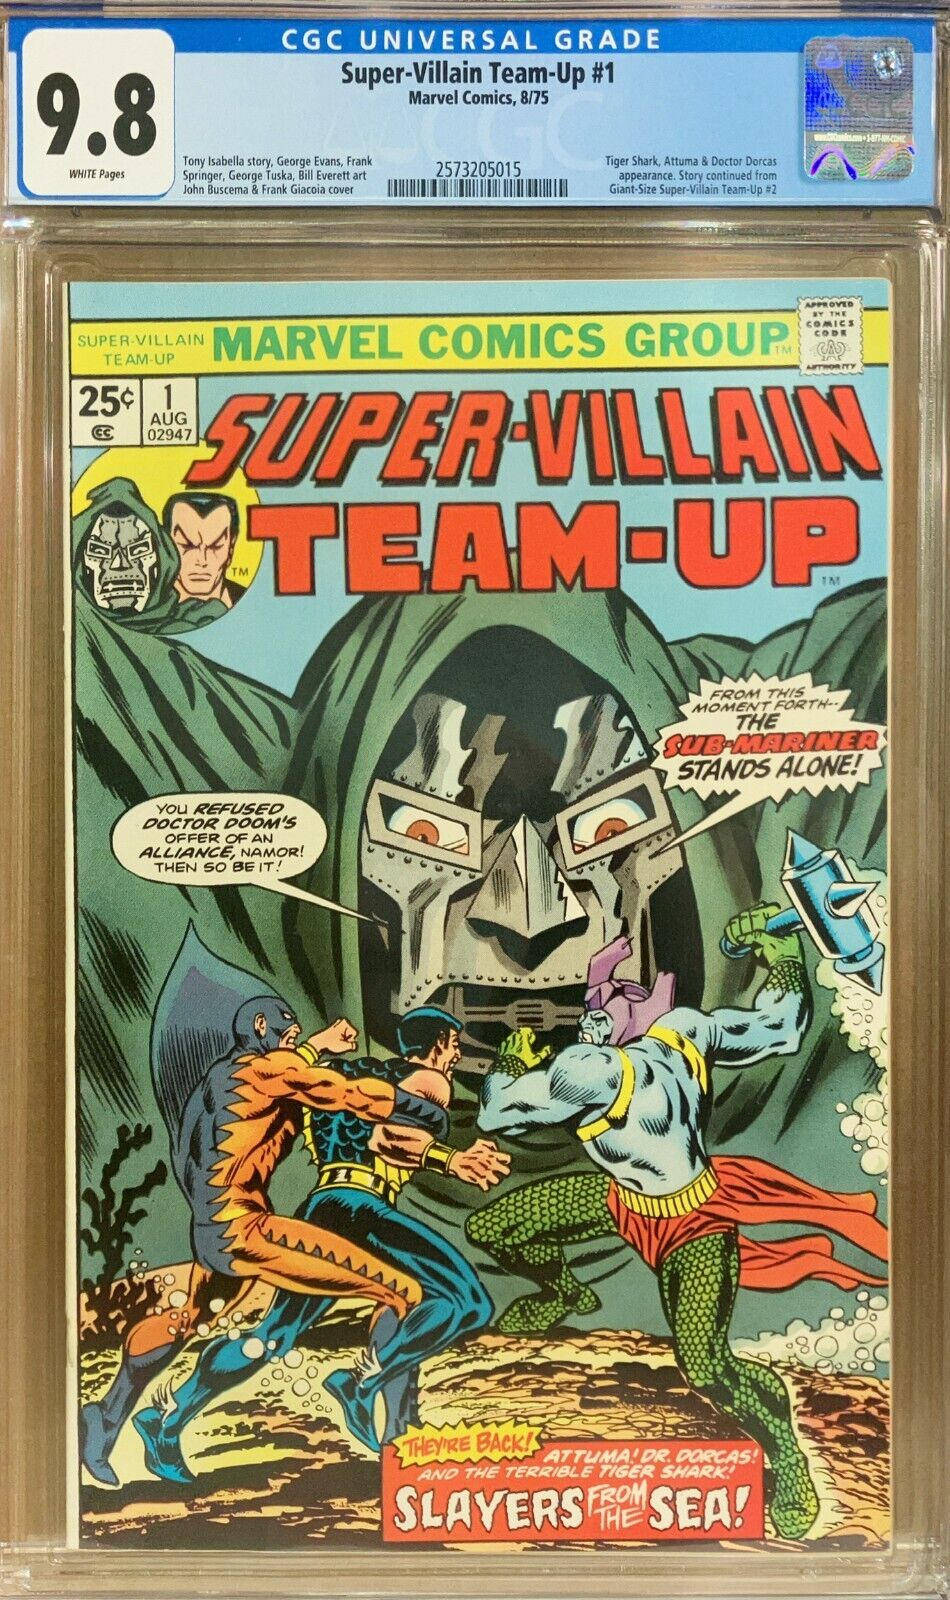 Super-Villain Team-Up #1 (1975) CGC 9.8 WHITE PAGES - Sweet Doom Cover